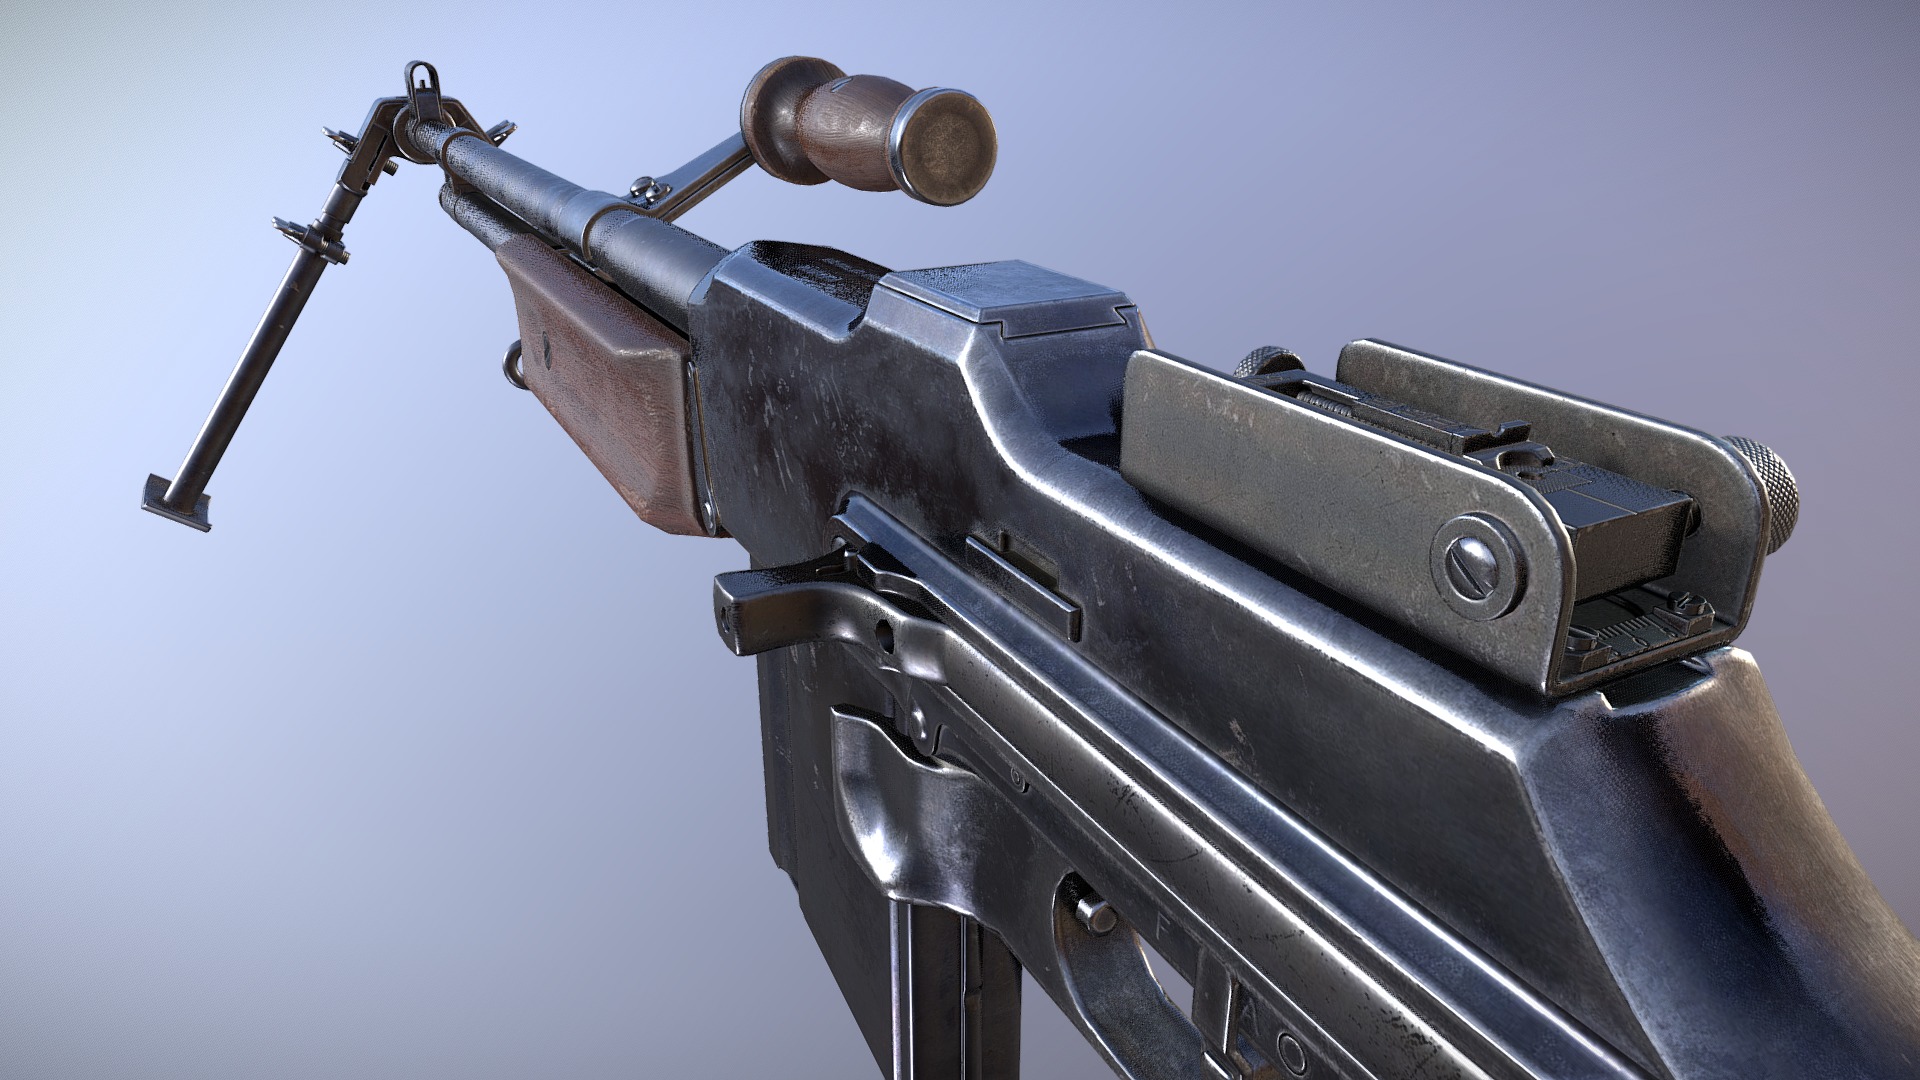 M1918A2 rifle designed for PBR engines.

Originally modeled in 3ds Max 2019. Download includes .max, .fbx, .obj, metal/roughness PBR textures, specular/gloss PBR textures, textures for Unity and Unreal Engines, and additional texture maps such as curvature, AO, and color ID.

Specs

Model ready for animation. Movable objects include: bolt carrier, bipod legs, carry handle, charging handle, fire selector, magazine release, magazine, rear sight ladder, rear sight aperture and trigger.

LODs: two lower level of detail models
LOD0: 16345 tris
LOD 1: 10008 tris
LOD 2: 6130 tris

Scaled to approximate real world size (centimeters)

Model is triangulated, no n-gons. Quaded version of the model included in the download.

Textures

2 Materials: 4096x4096 PBR set for the gun , 512x512 textures for the .30-06 cartridge

Unity Engine 5 Textures: AlbedoTransparency, MetallicSmoothness, Normal, Occlusion

Unreal Engine 4 Textures: BaseColor, Normal, RoughnessMetallicAO - B.A.R. M1918A2 - For Sale - Buy Royalty Free 3D model by Luchador (@Luchador90) 3d model